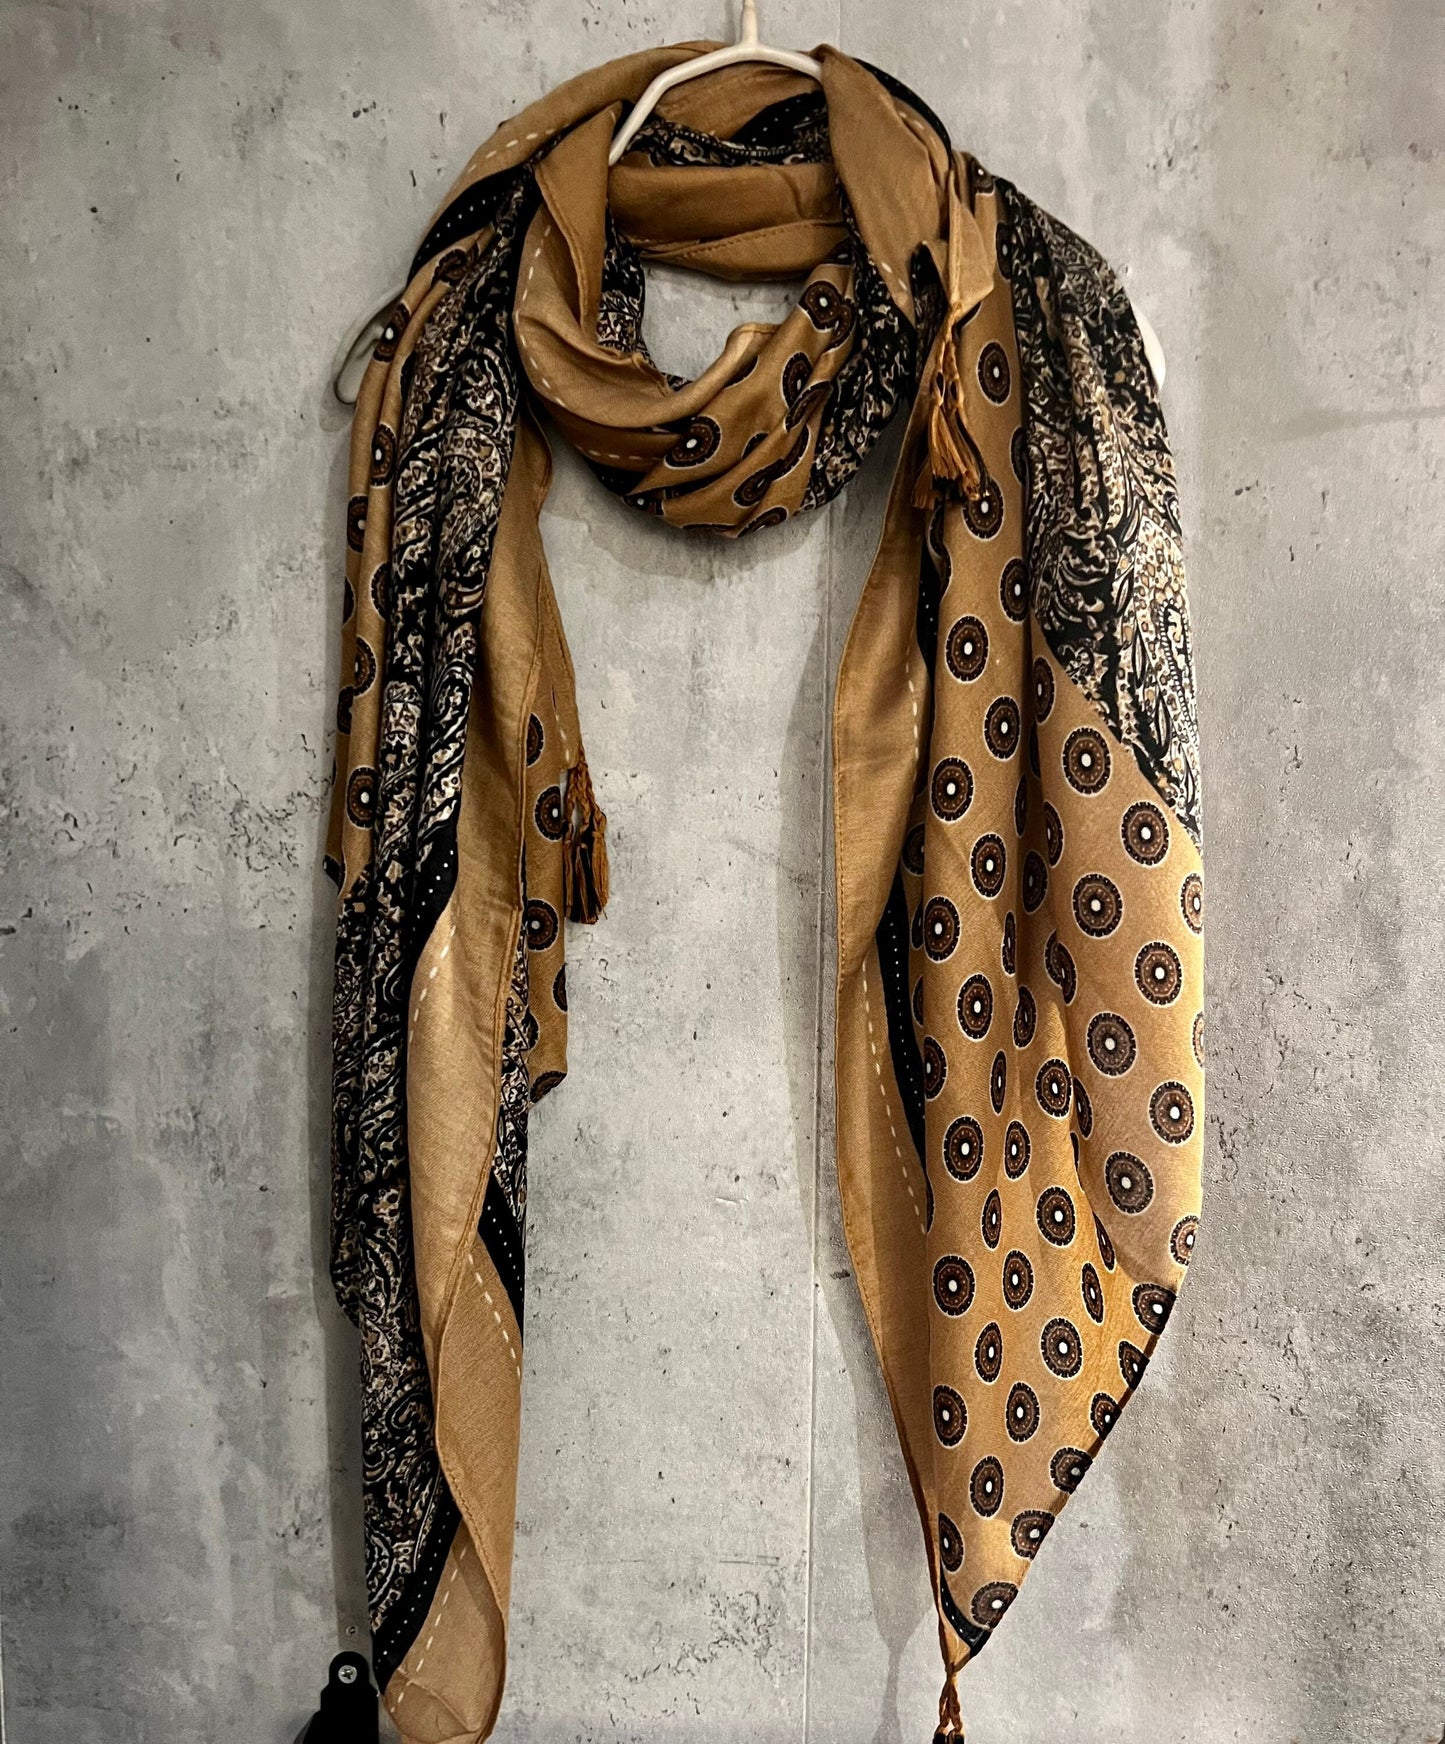 Modern Paisley With Tassels Brown Cotton Scarf/Summer Autumn Winter Scarf/Gifts For Mum/Gifts For Her Birthday Christmas/UK Seller